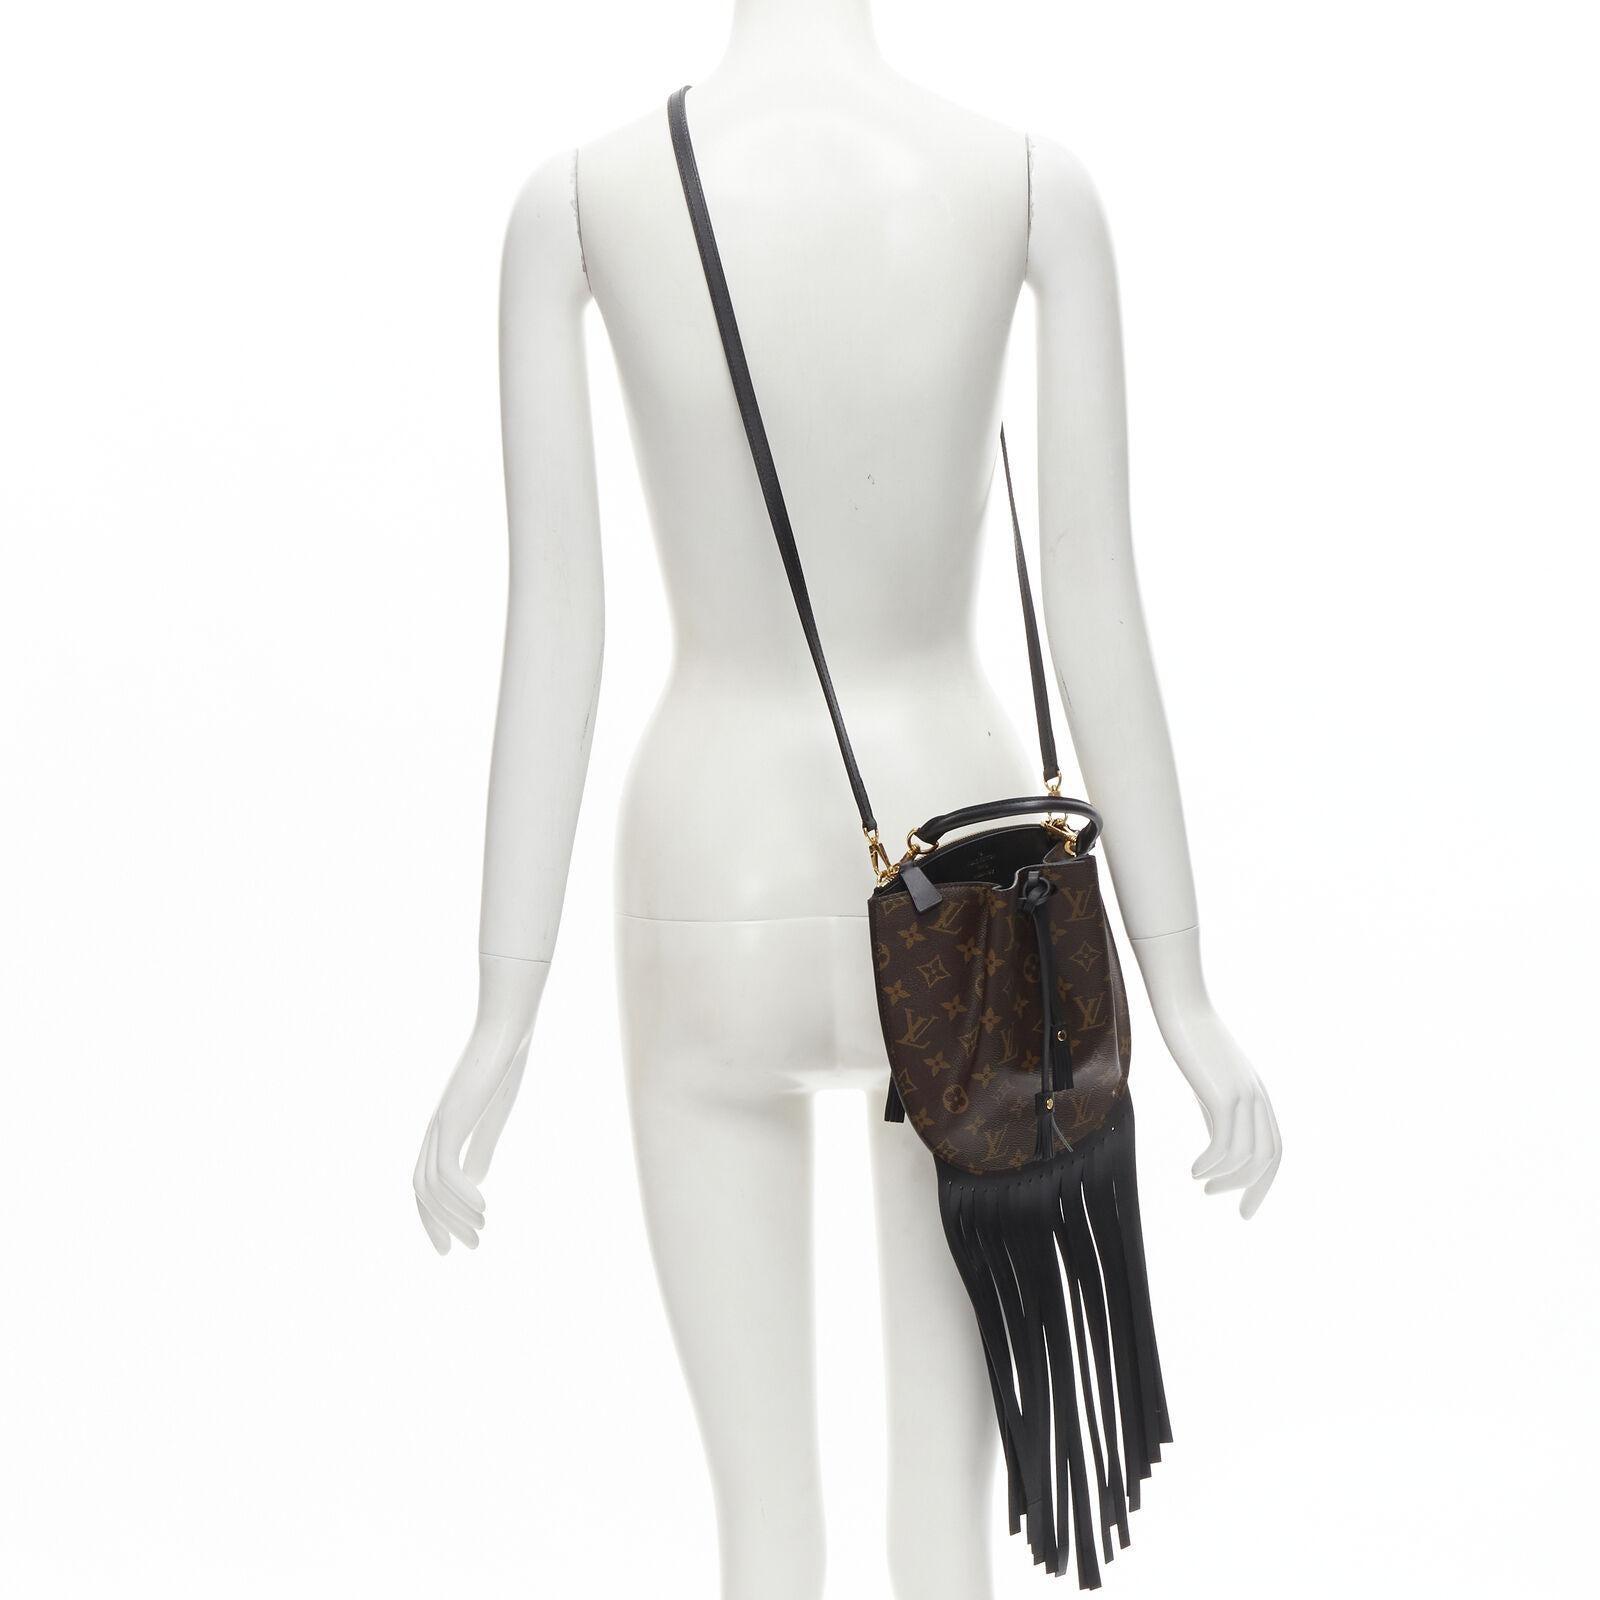 LOUIS VUITTON 2017 Fringed Noe brown LV canvas drawstring crossbody bag
Reference: KEDG/A00252
Brand: Louis Vuitton
Designer: Nicolas Ghesquiere
Model: Fringed Noe
Collection: 2017
Material: Canvas, Leather
Color: Brown, Black
Pattern: